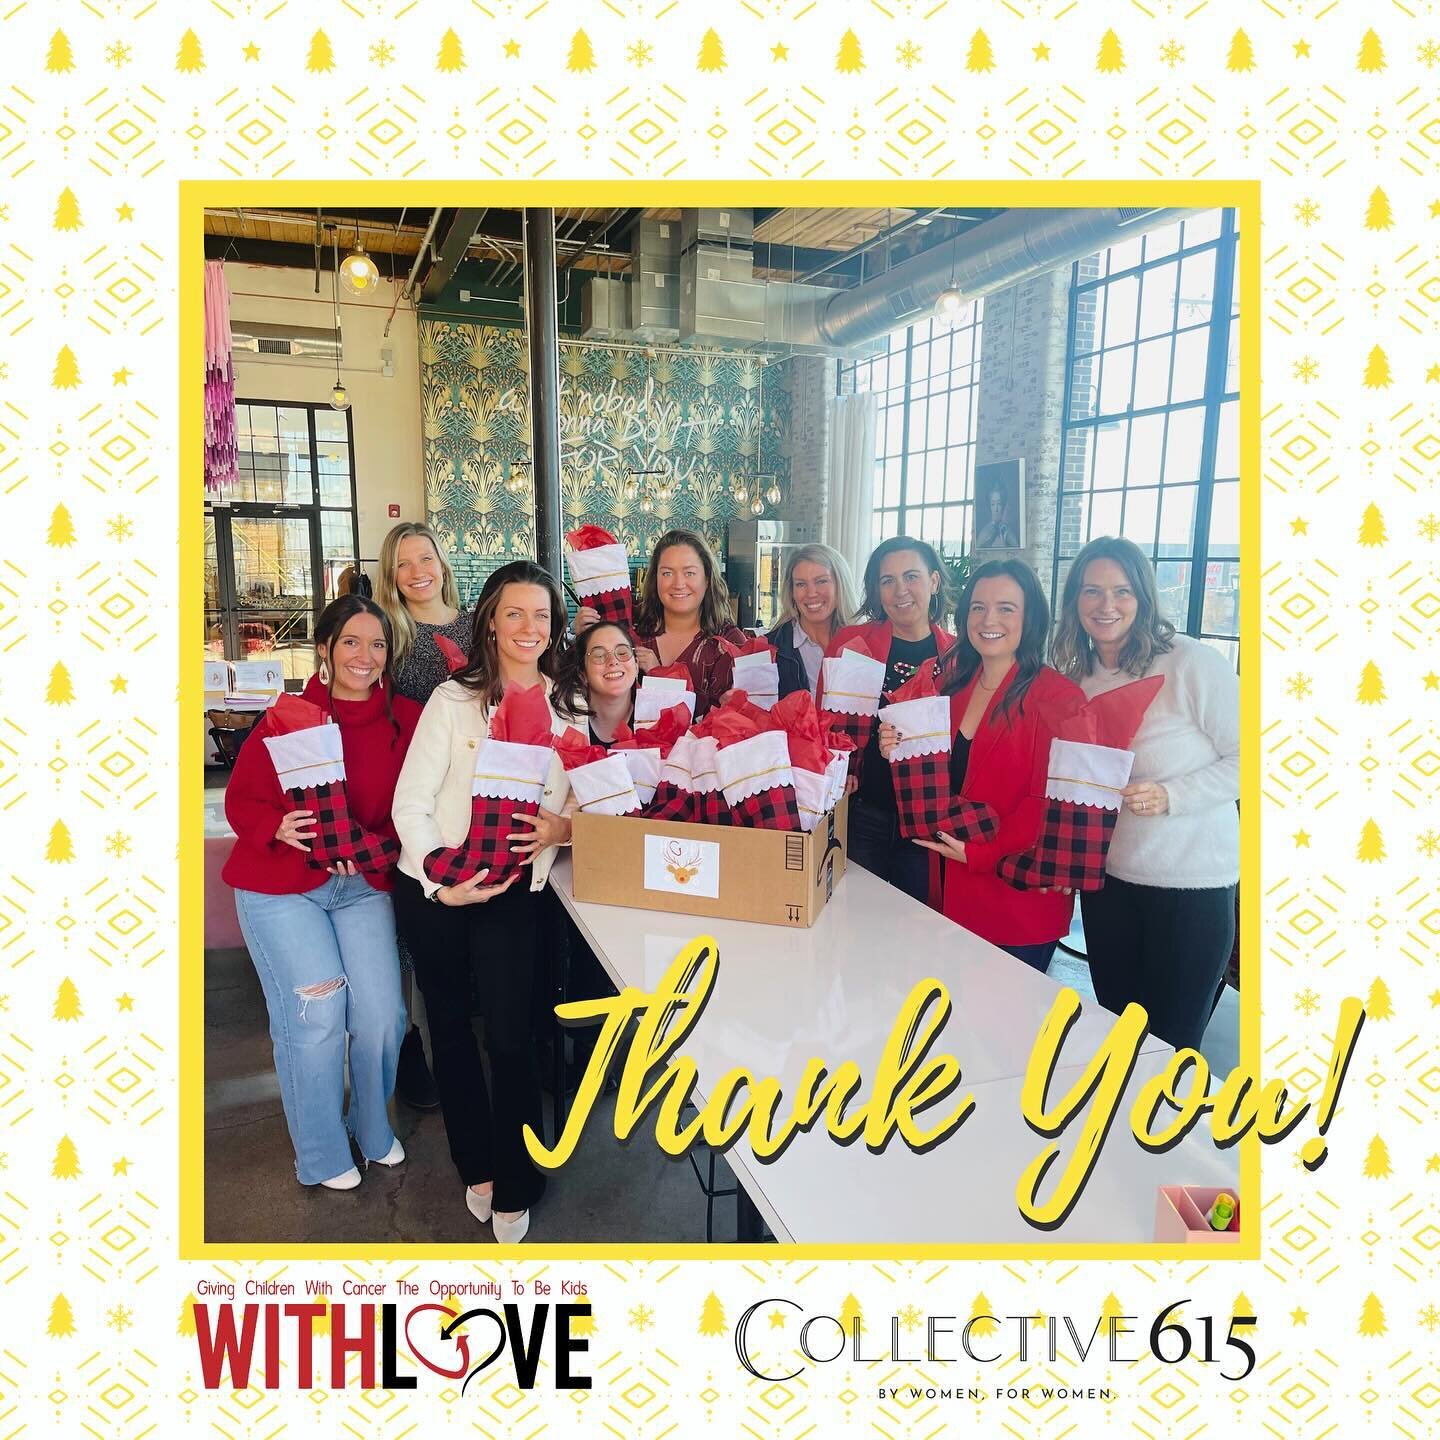 Stocking Stuffers &hearts;️🧦

Thank you @collective615 for sponsoring our Stocking Stuffers again this year! We had so much fun attending your holiday potluck on Tuesday and loved connecting with your beautiful and inspiring members. 

We are gratef